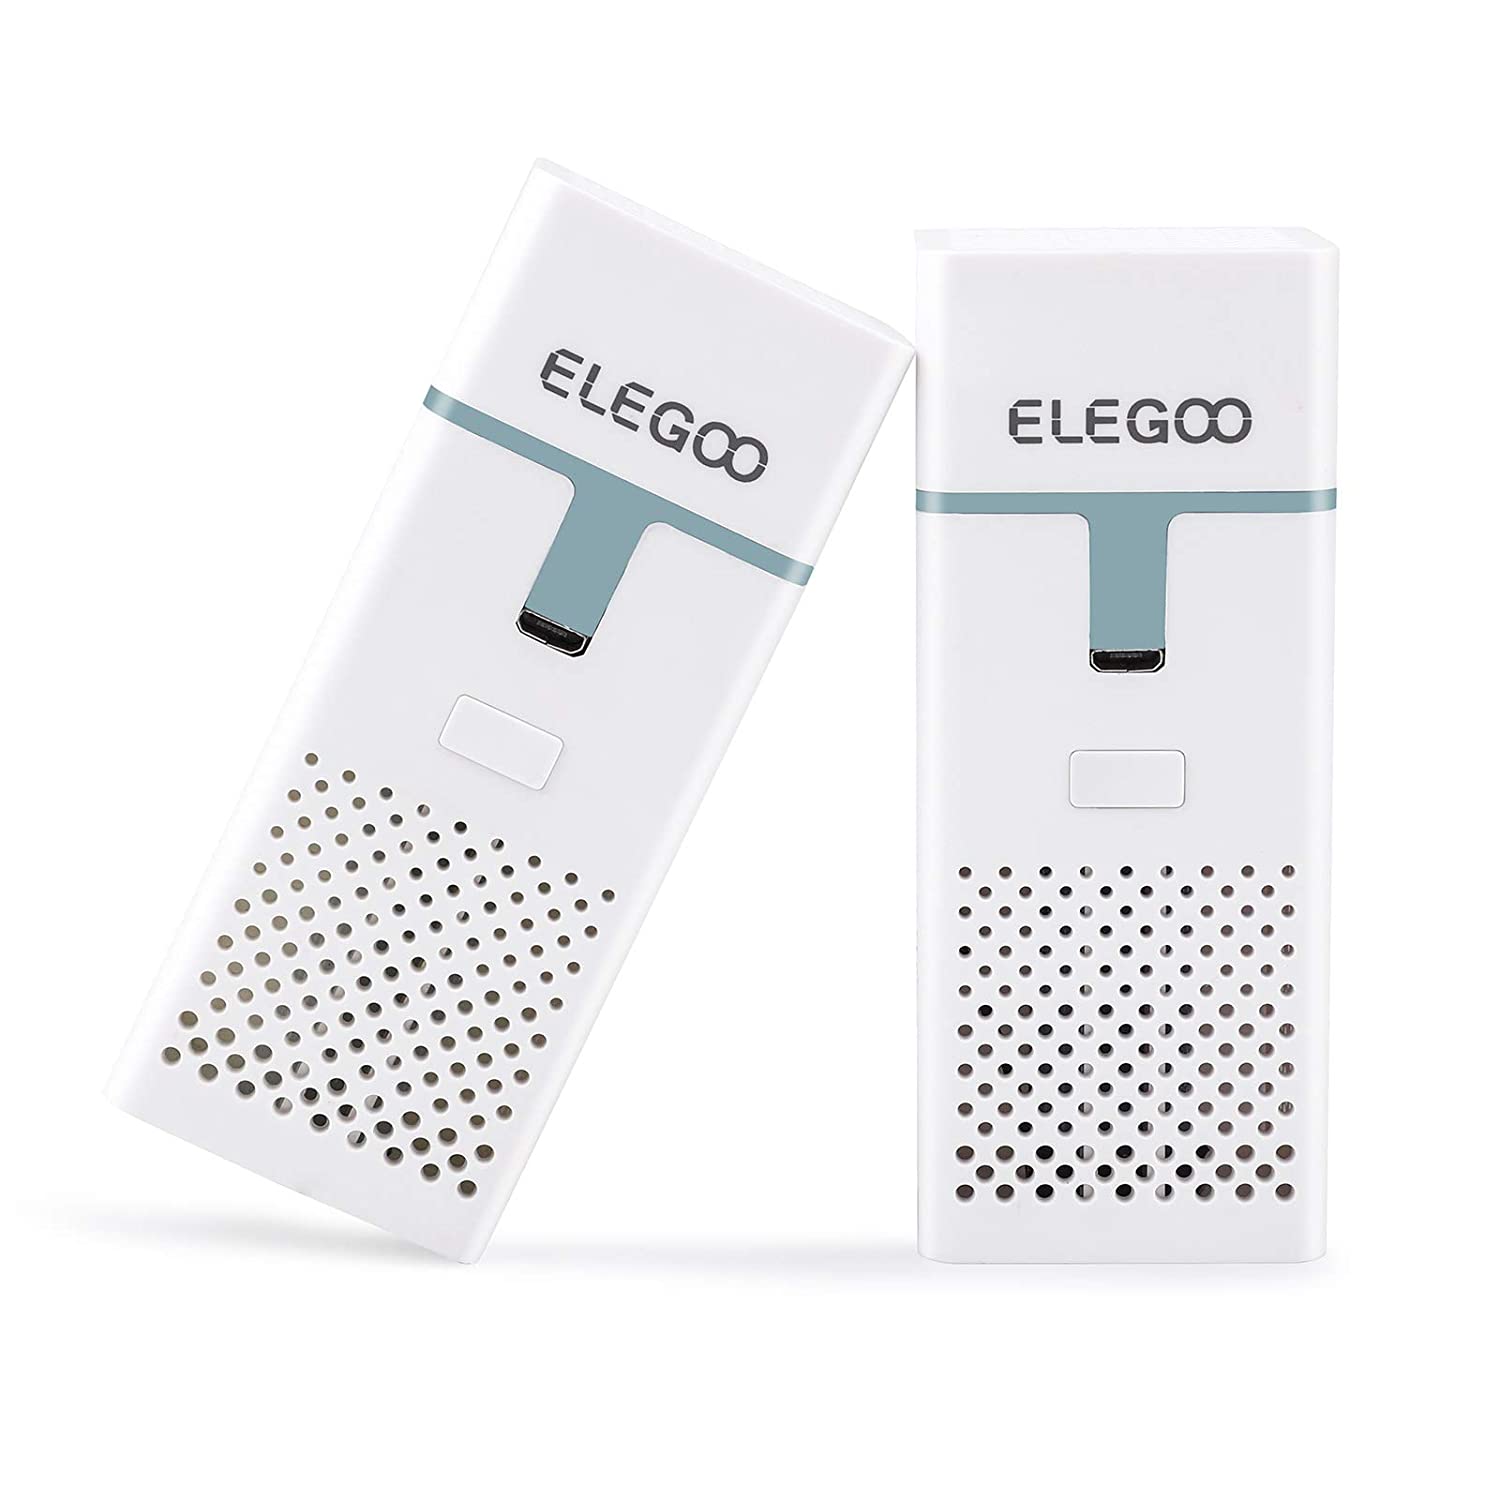 ELEGOO Mini Air Purifier with Activated Carbon Filter and Universal Adaptor for LCD DLP MSLA Resin 3D Printer (Pack of 2)